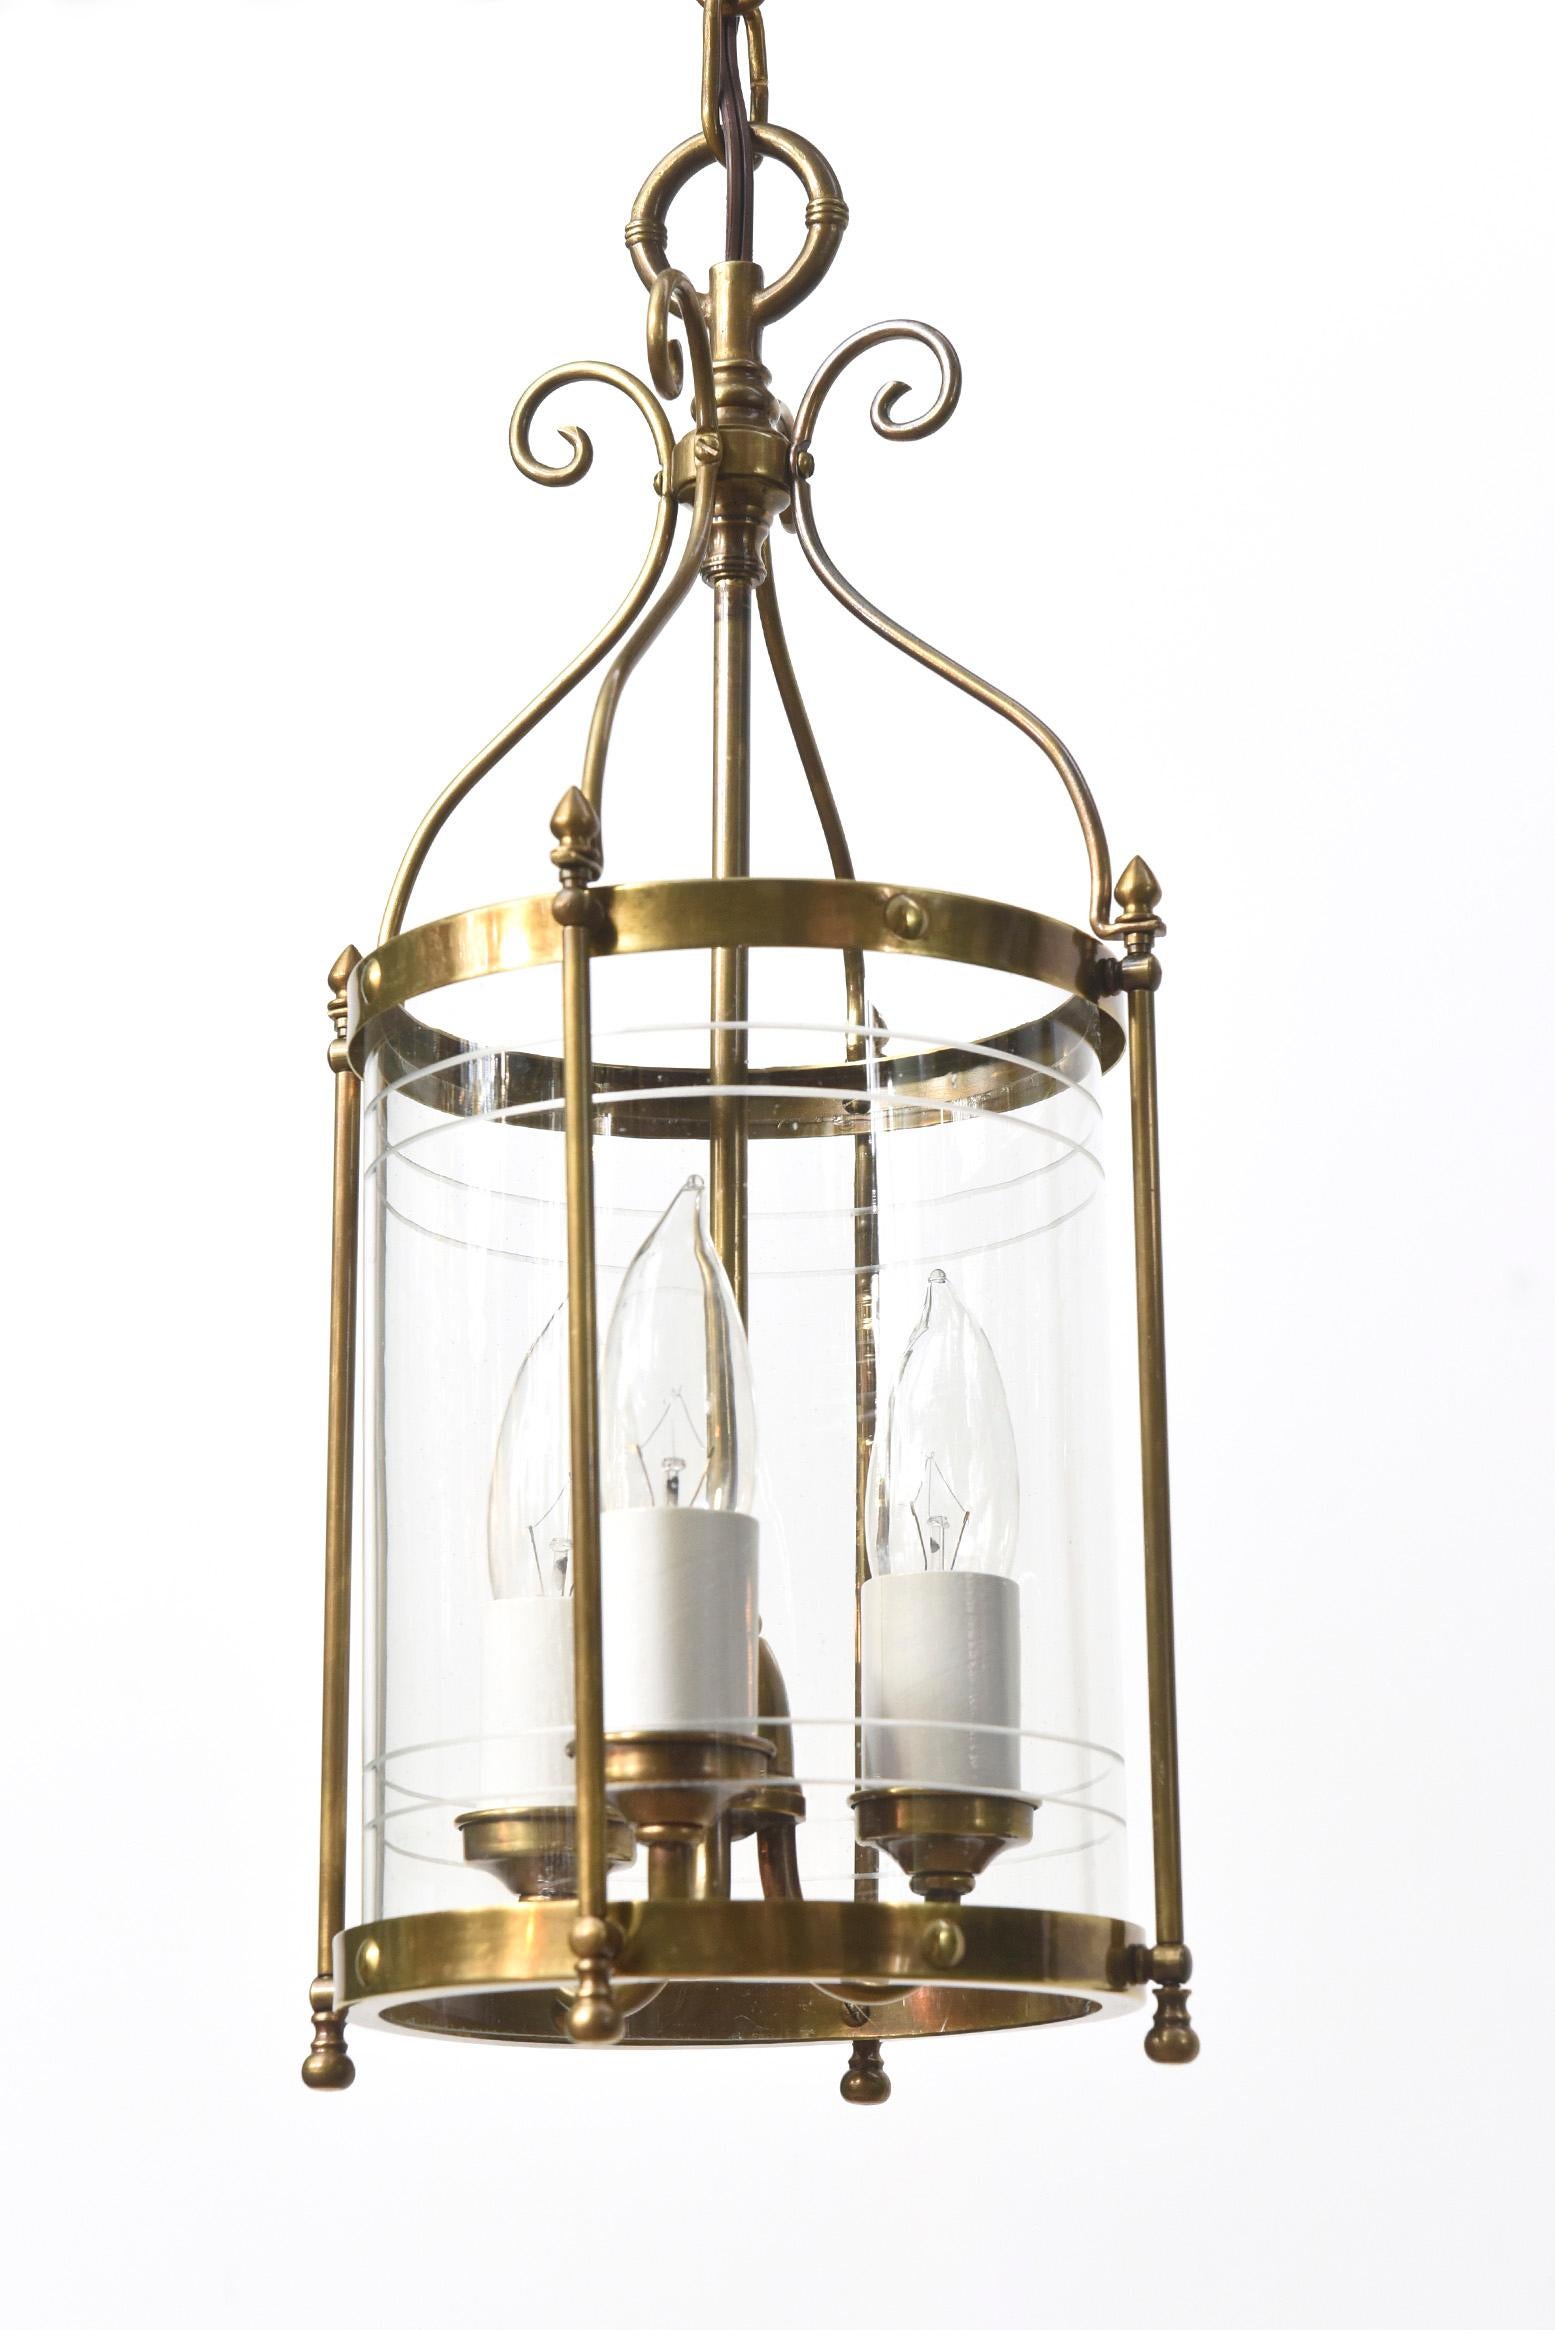 Small brass and Glass lantern with etched glass cylinder and three light cluster. Early 20th Century, Eastern European. Completely restored with a light antique brass finish, rewired and ready to hang.

Dimensions: 
Height: 20
Width (Diameter): 7.